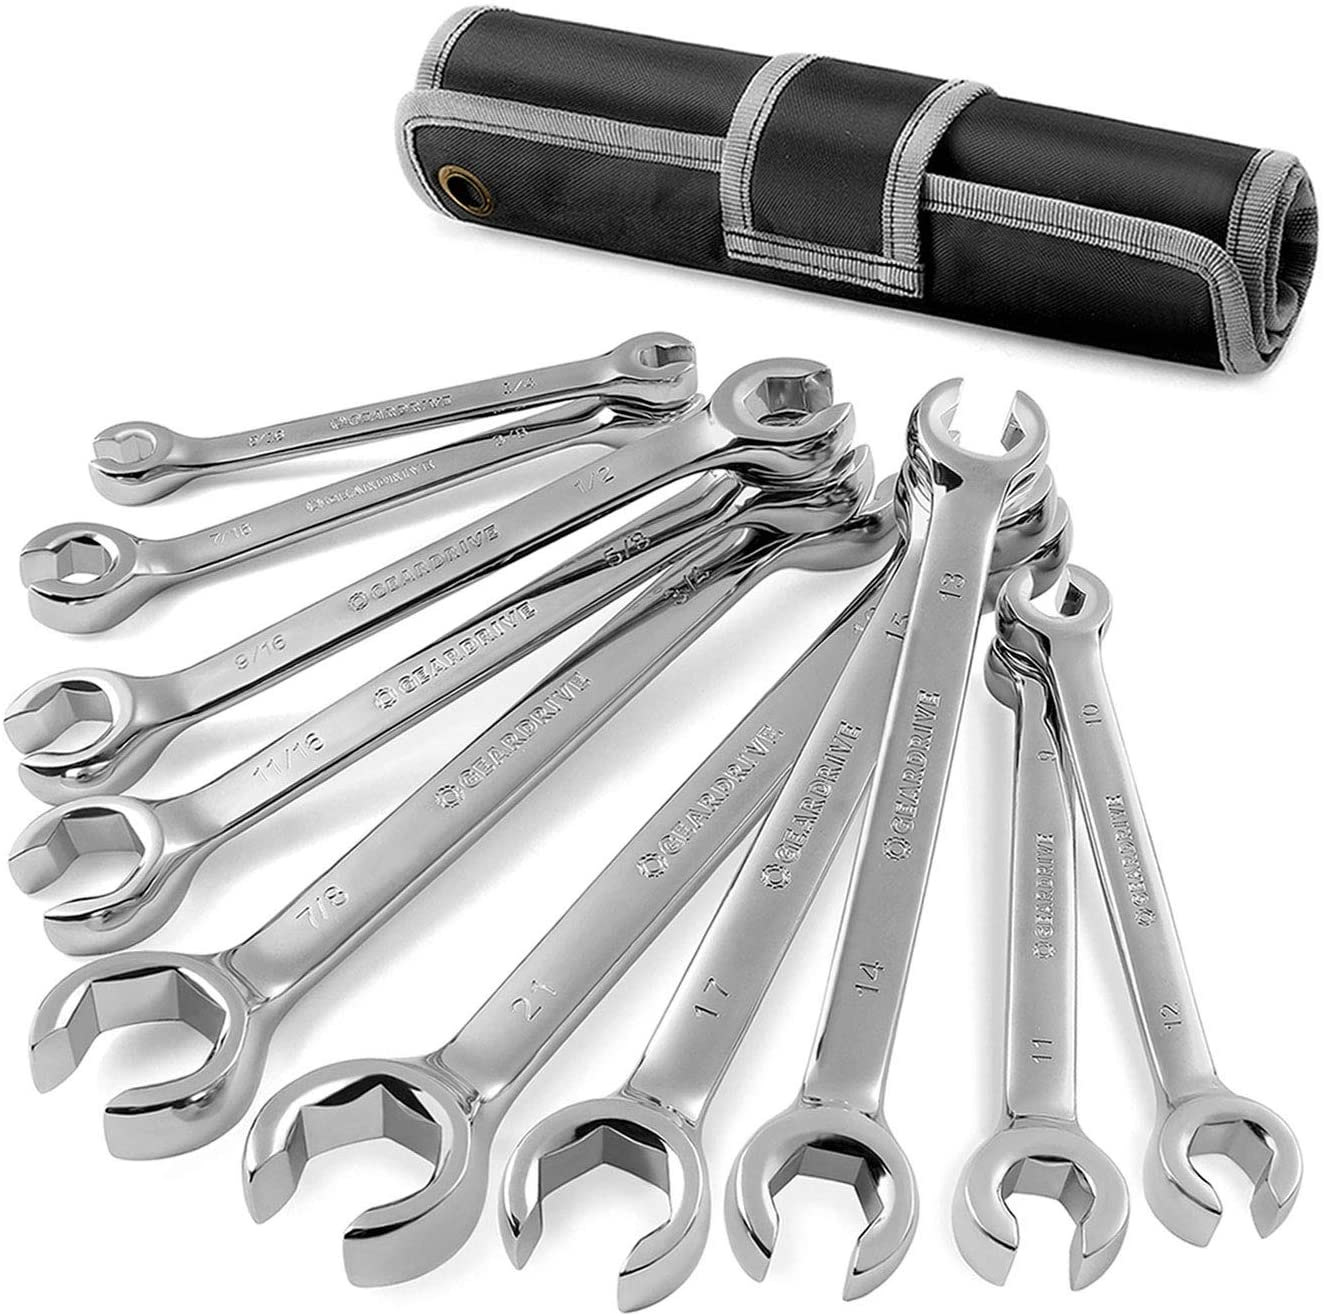 Amazon.com: Flare Nut Wrench Set, Standard & Metric, 10-Piece, 1/4" to 7/8'' & 9-21mm $22.99